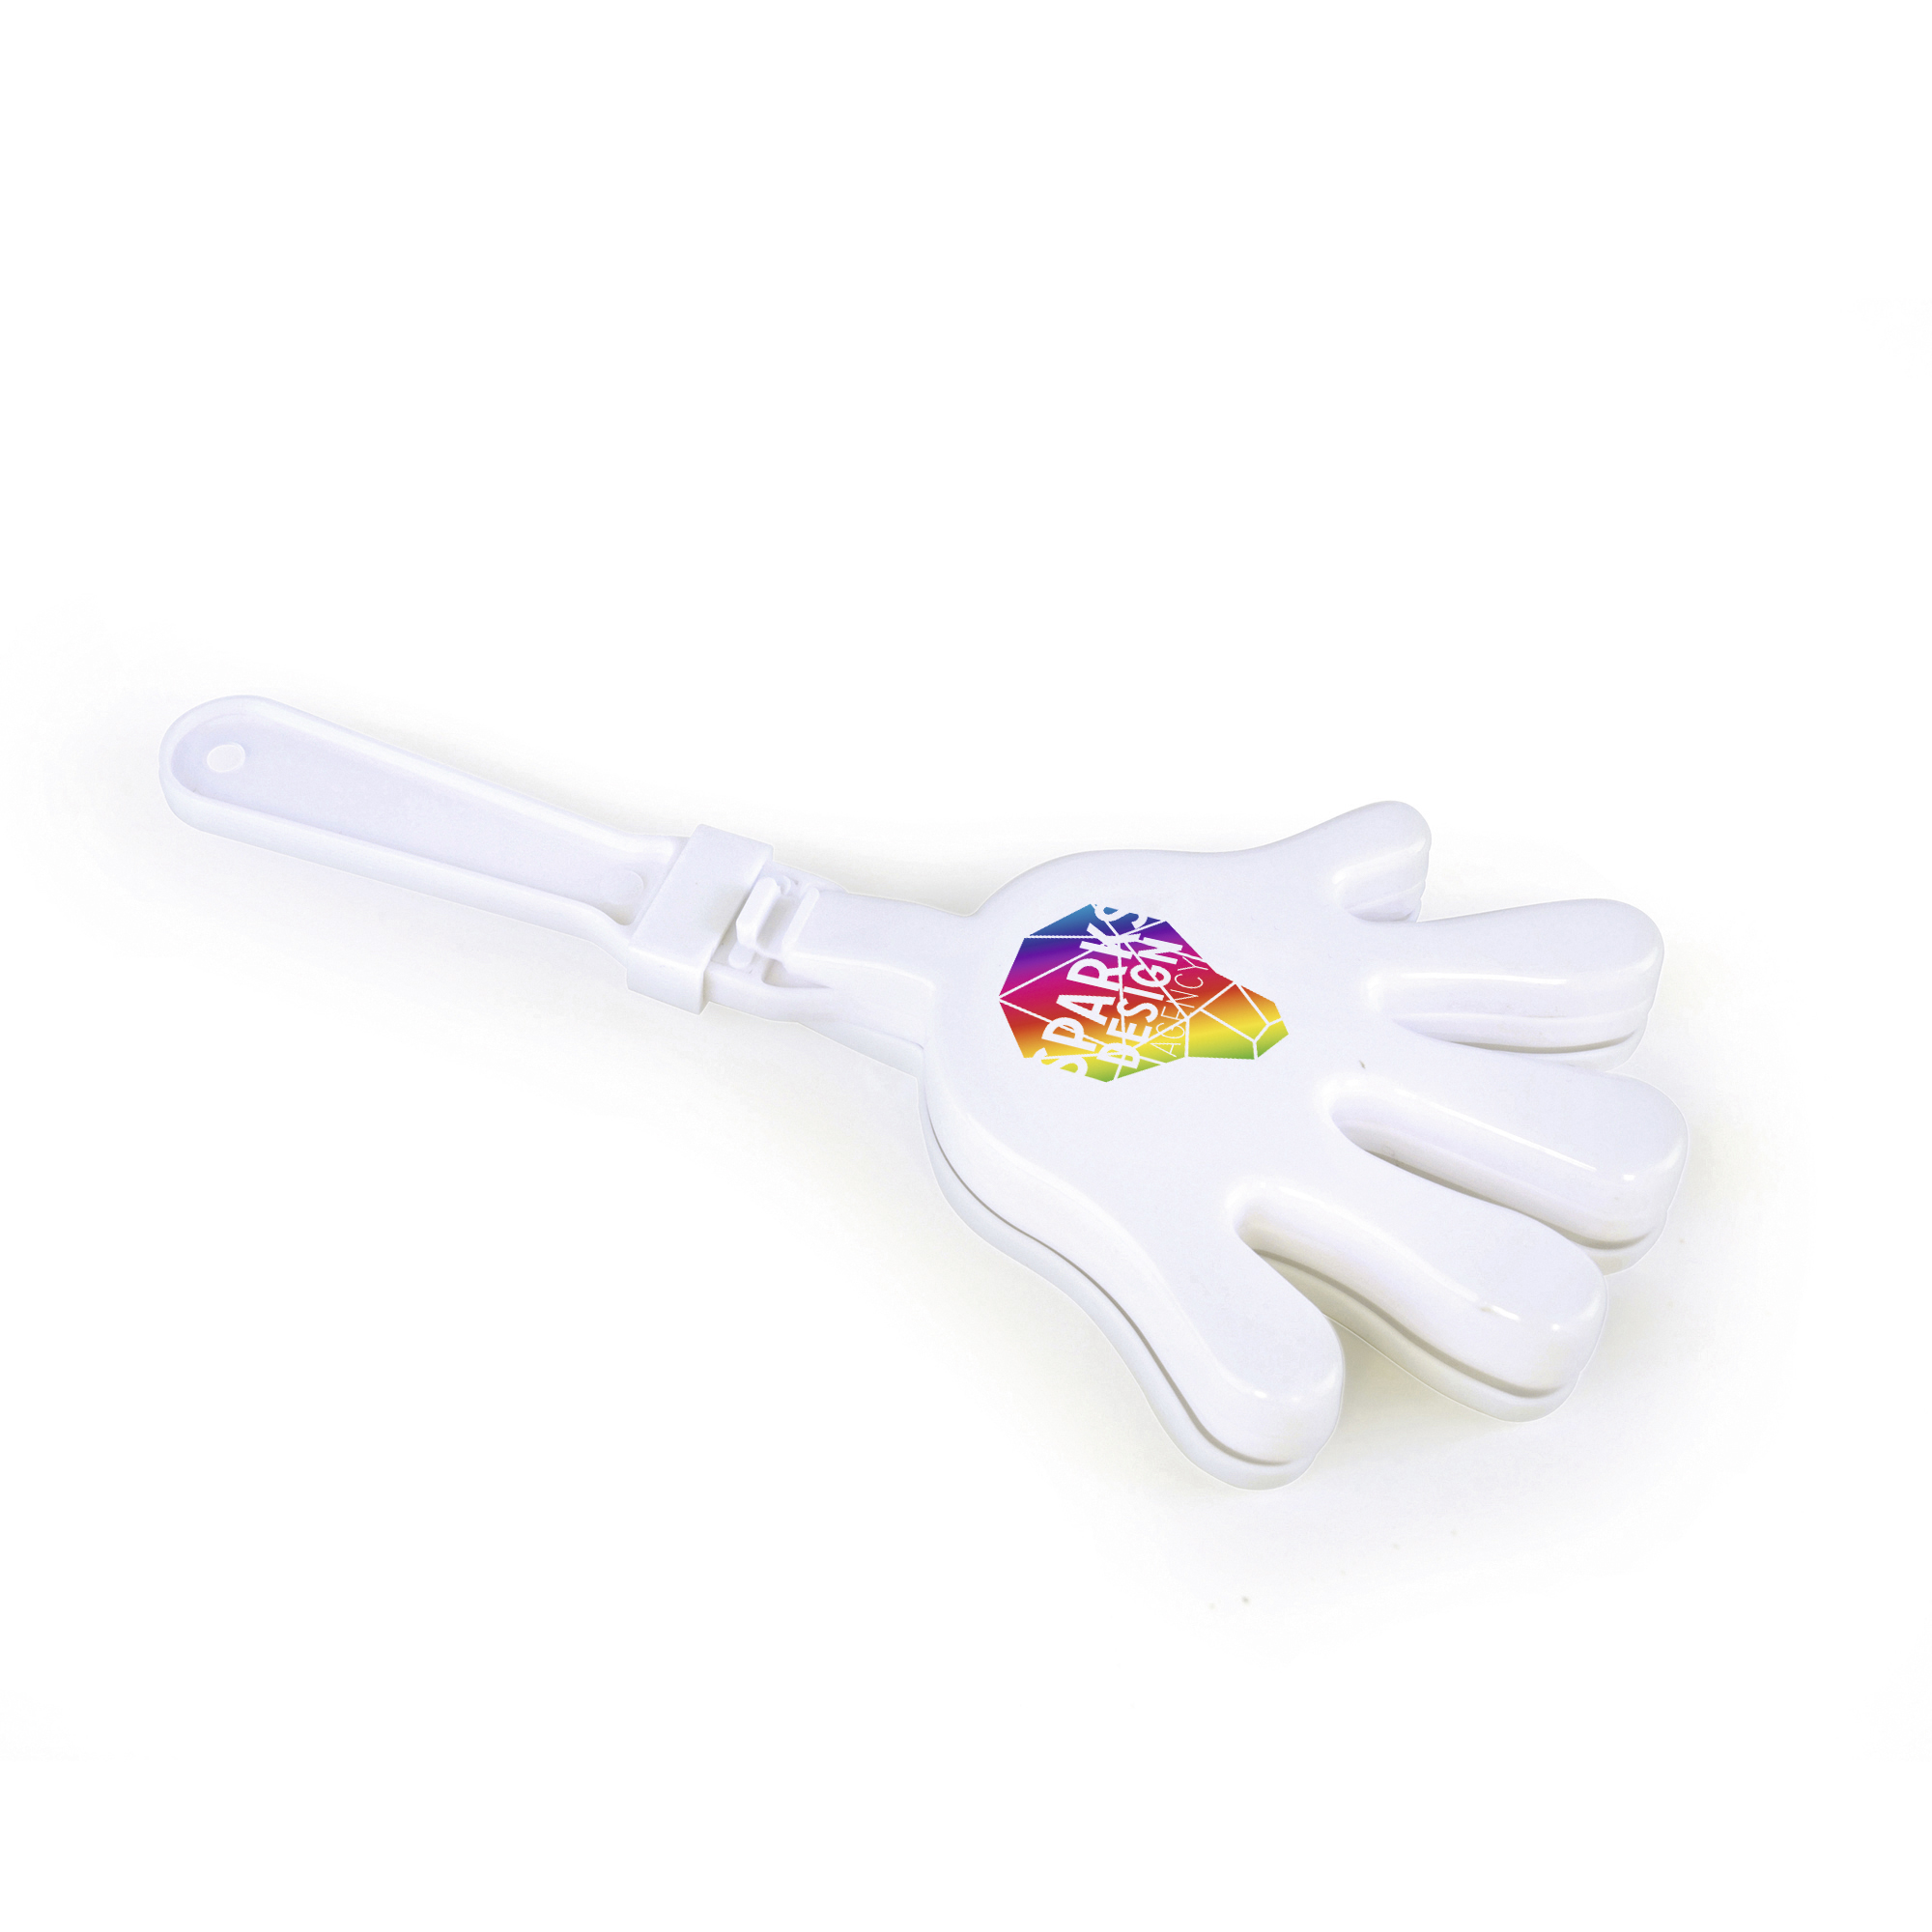 Promotional Hand Clapper